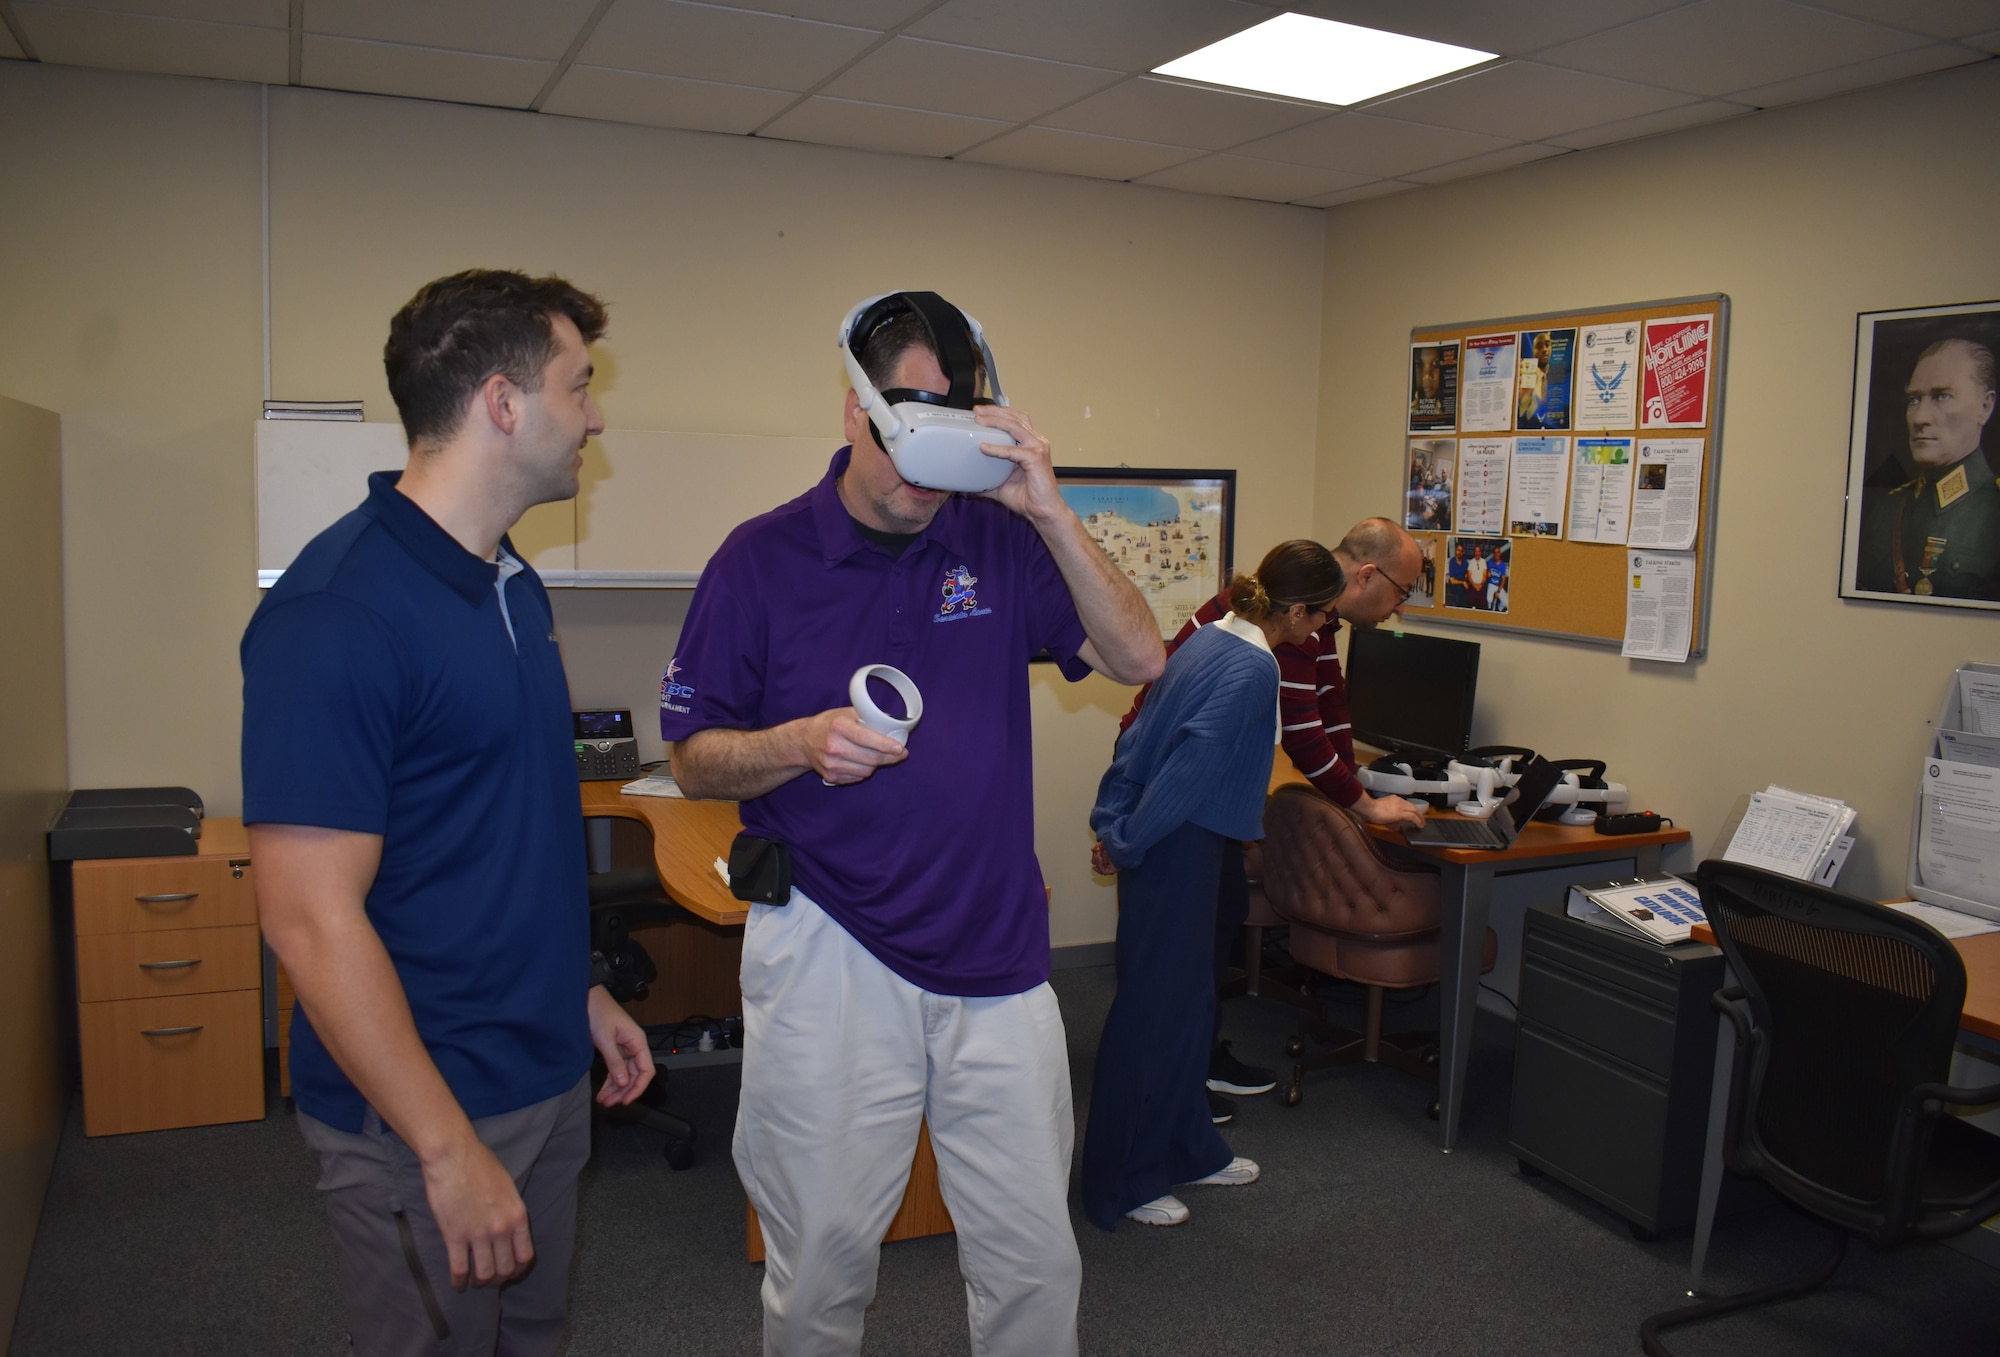 Asa Peck, 425th Air Base Squadron housing manager, tests the virtual reality headset, at the housing office at the Izmir Consolidated Center, March 30, 2023.